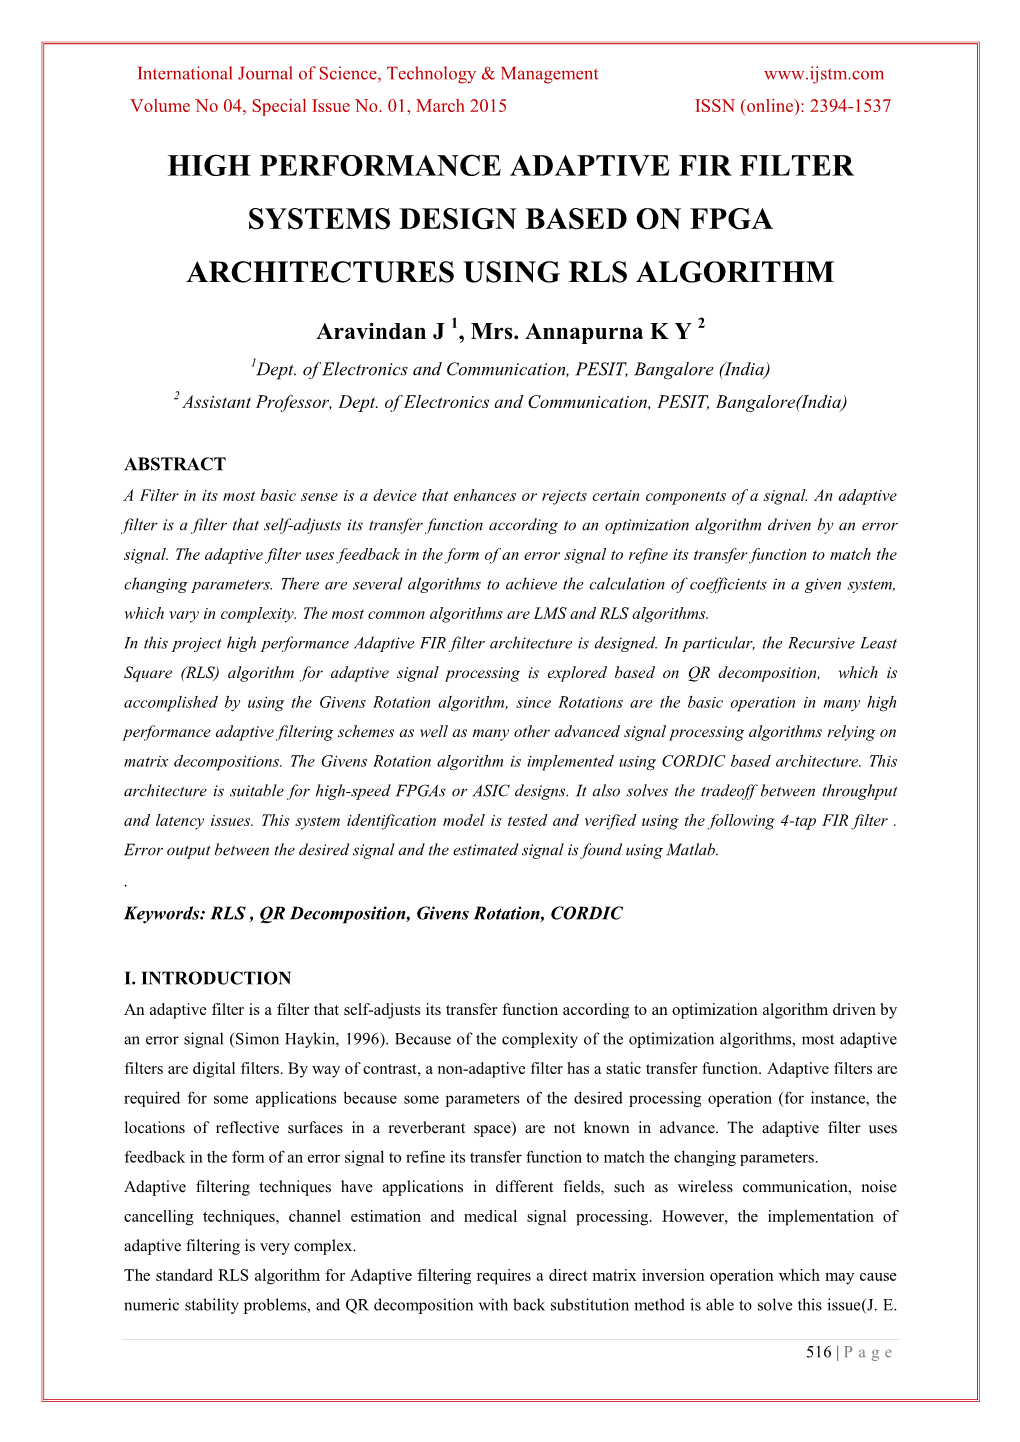 High Performance Adaptive Fir Filter Systems Design Based on Fpga Architectures Using Rls Algorithm